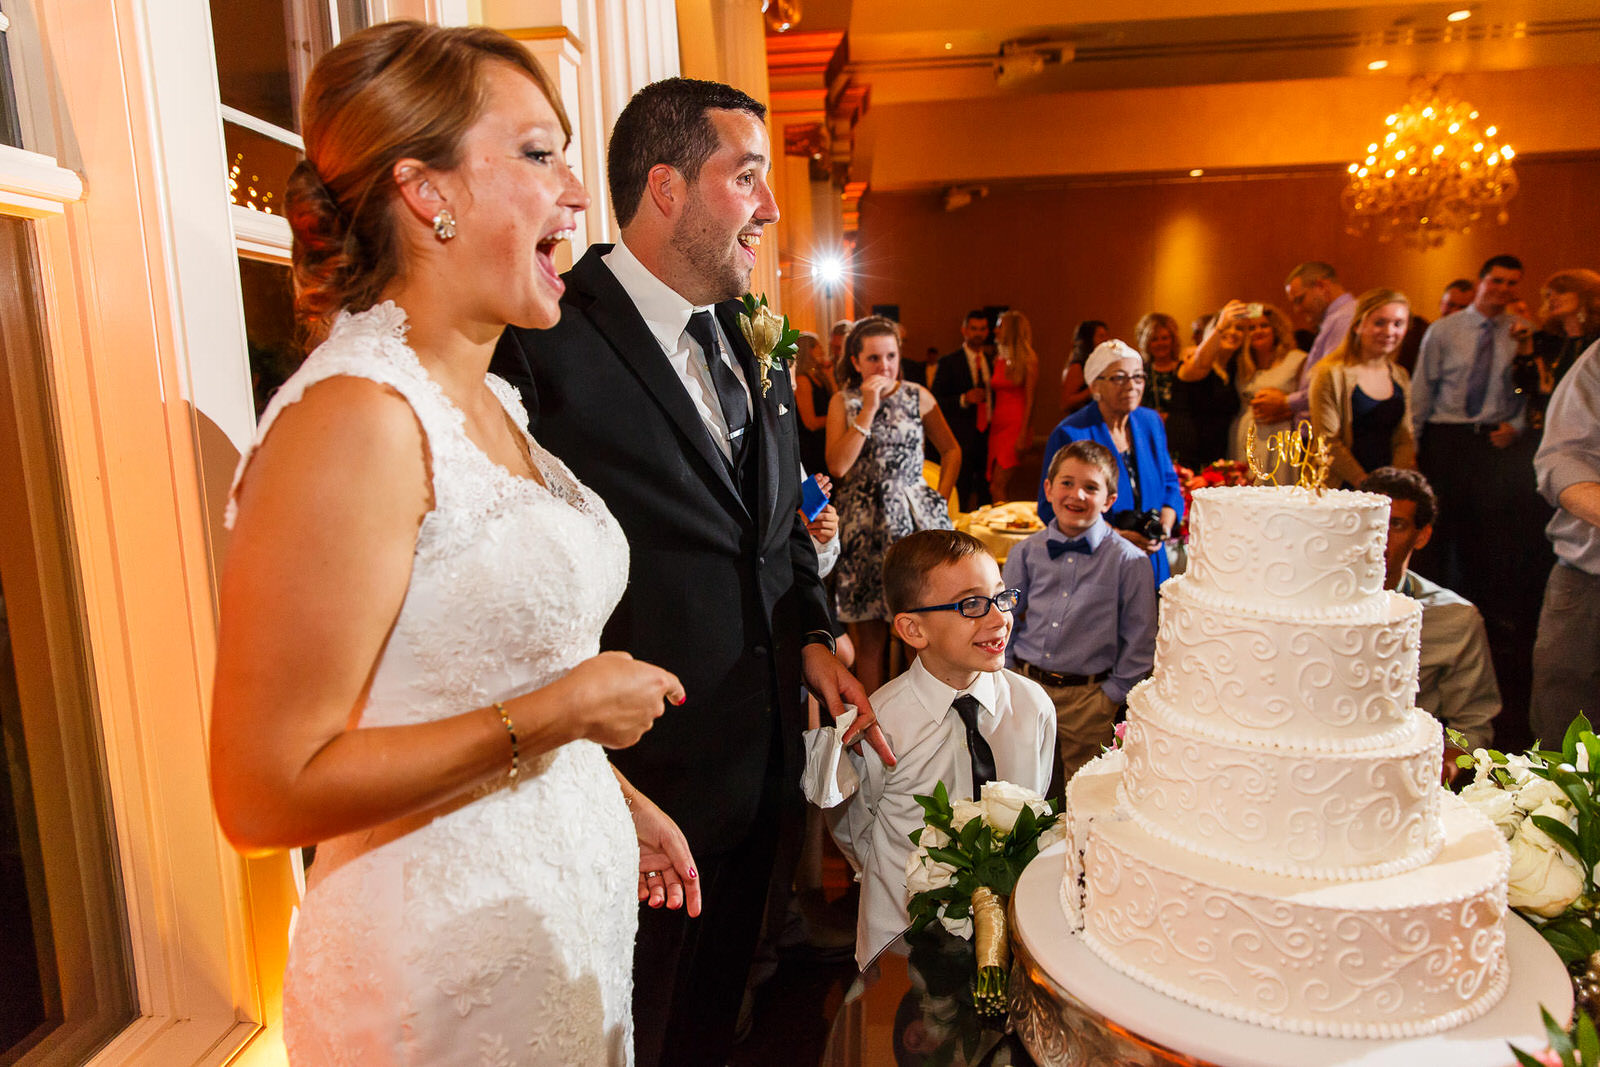 Bride and Groom Cut Their Wedding Cake at The Riverview